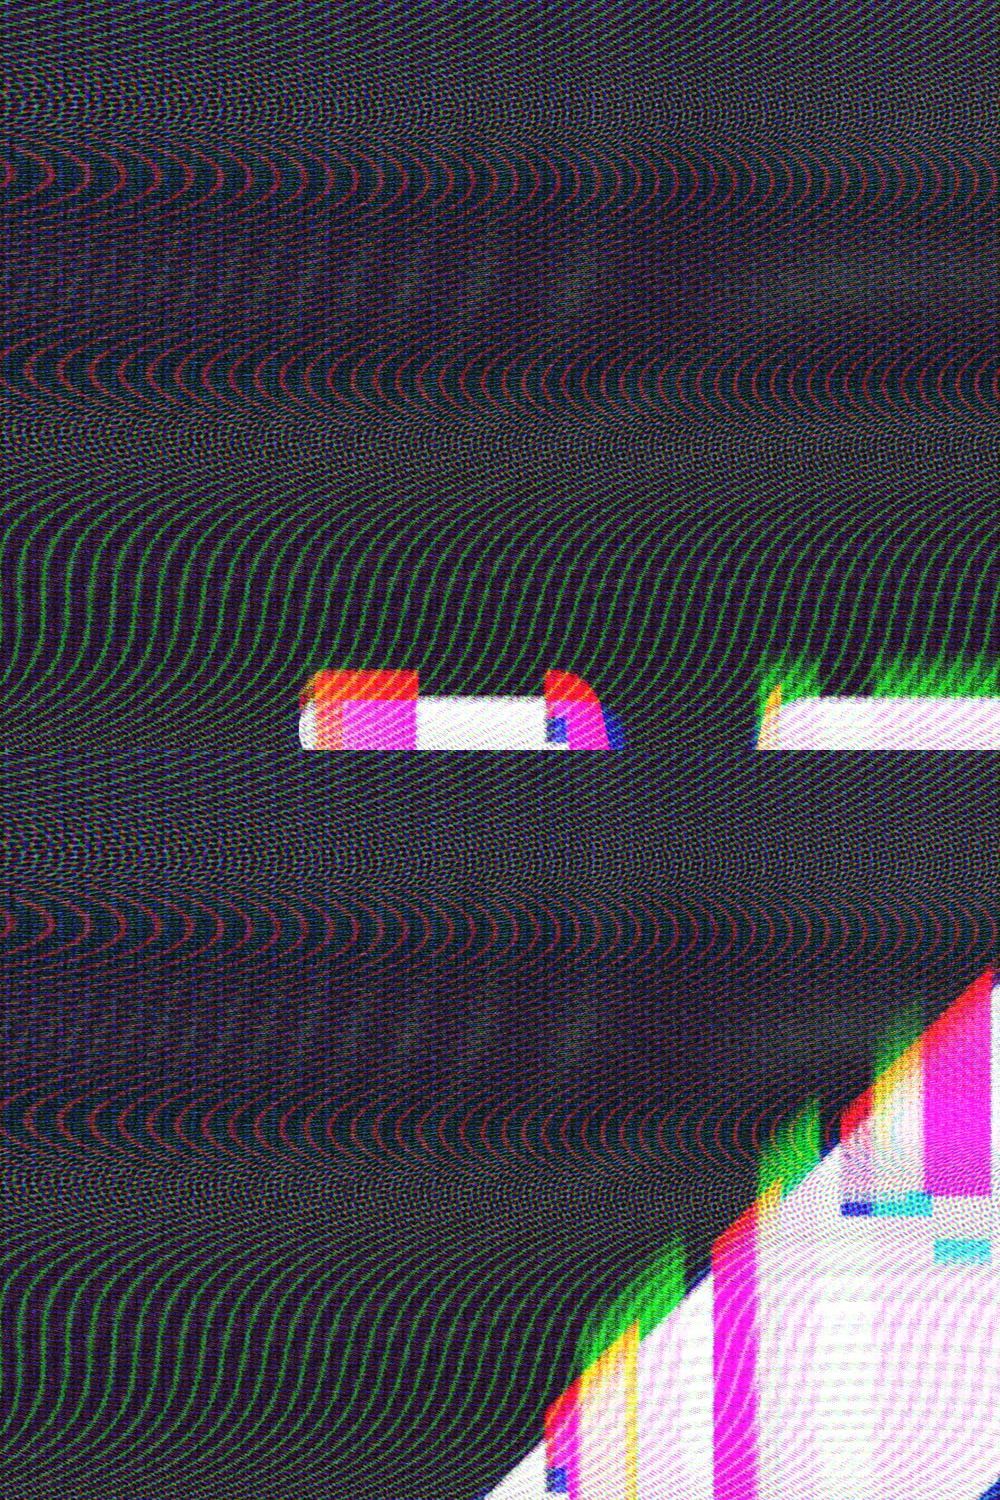 Creepy VHS Glitch Effect pinterest preview image.